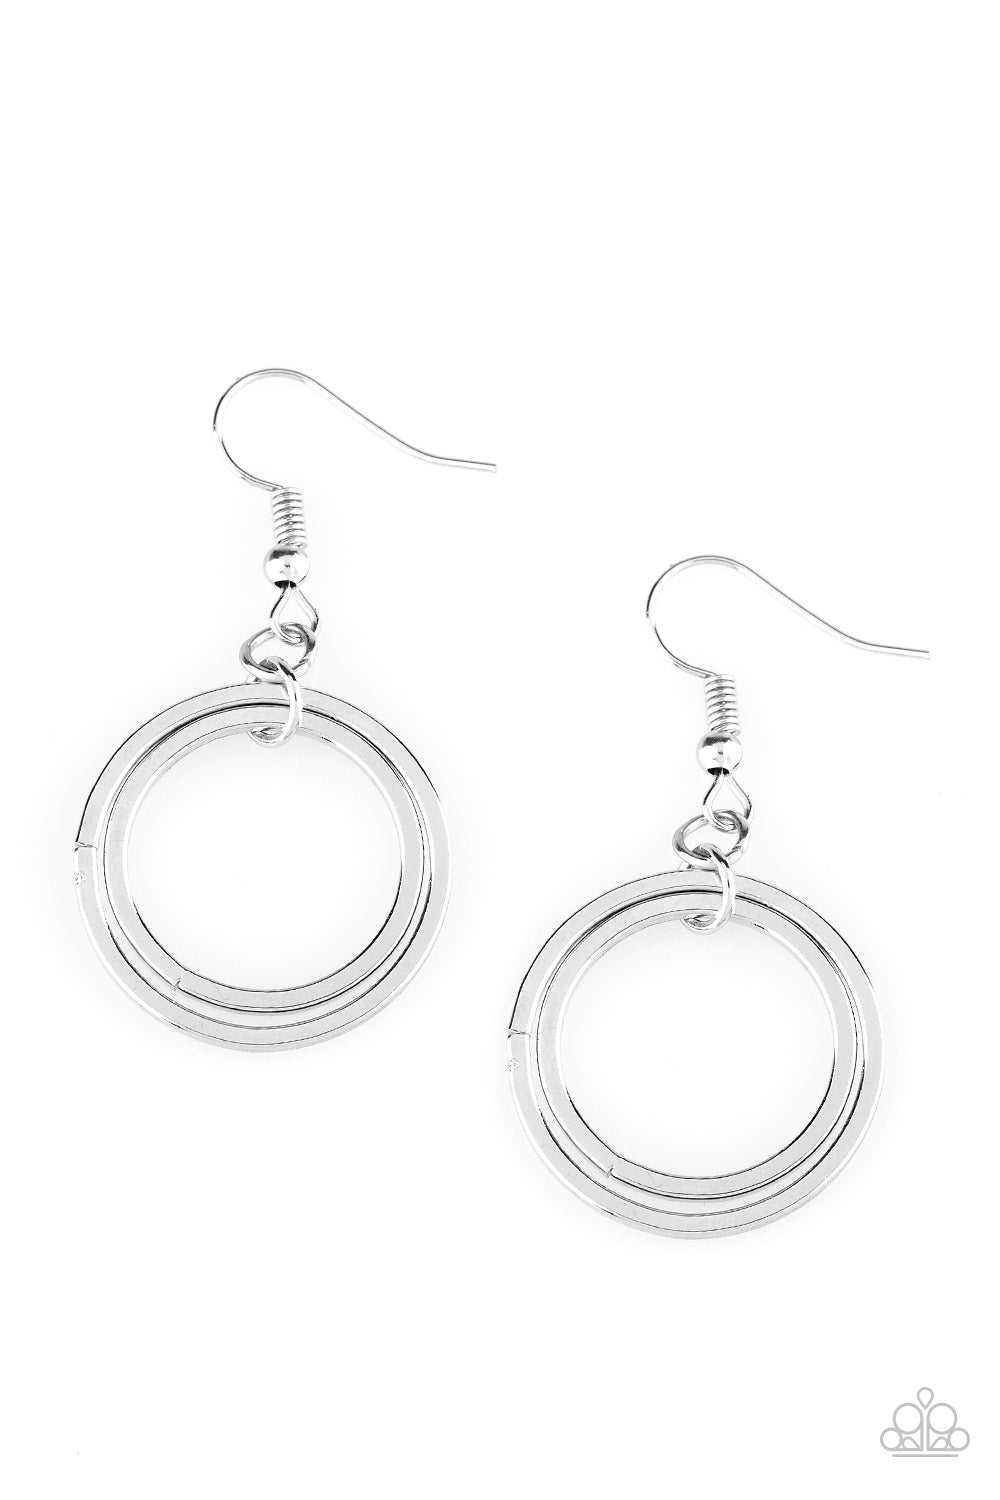 THE GLEAM OF MY DREAMS - SILVER DOUBLE CIRCLE DAINTY HOOP EARRINGS